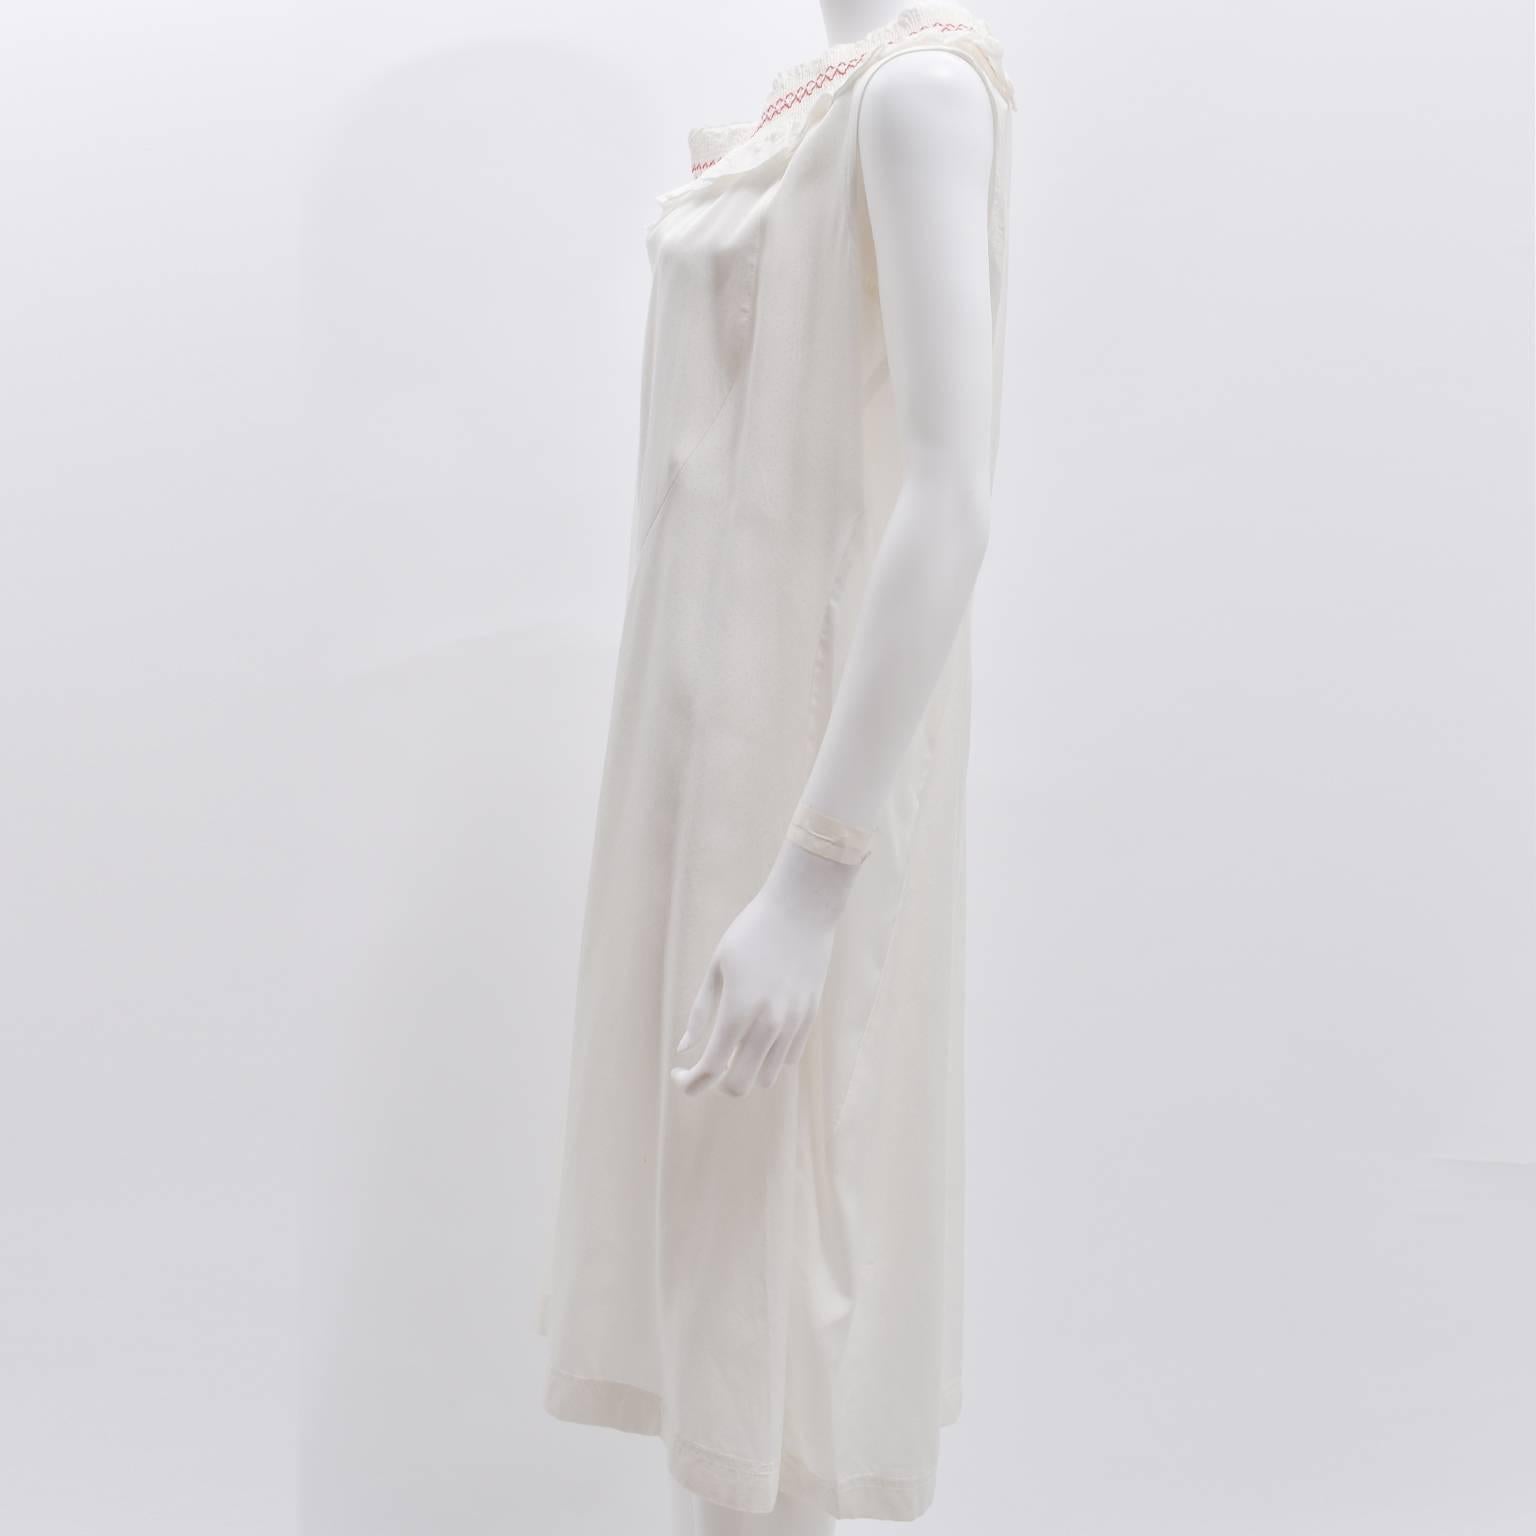 Comme des Garcons Tricot White Dress with Shirred Neckline 2002 In Good Condition For Sale In London, GB